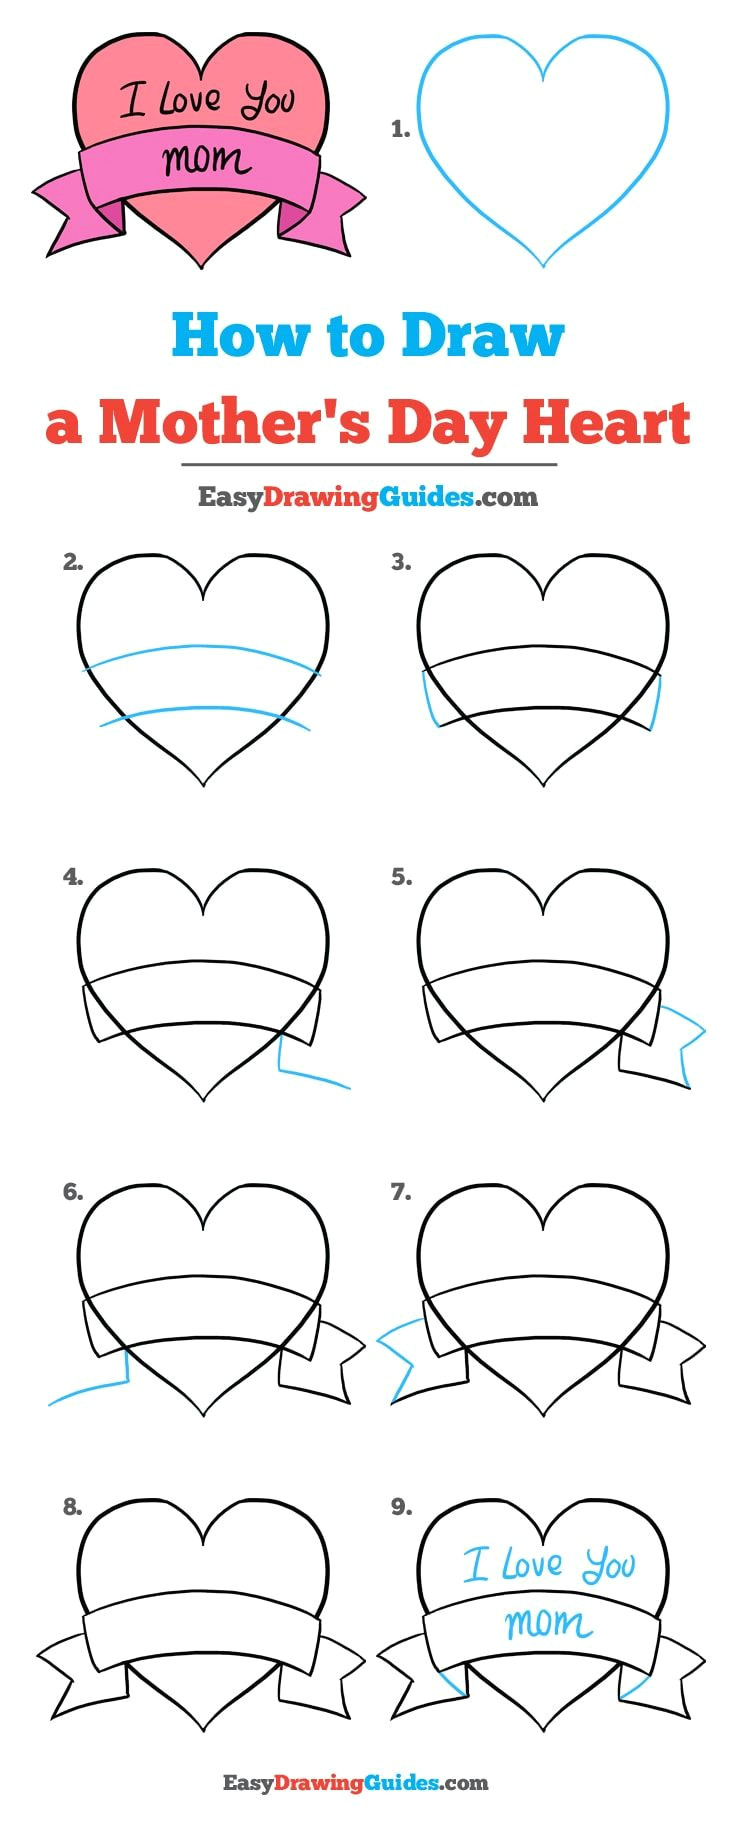 Beginner Easy Drawings How to Draw A Mother S Day Heart Really Easy Drawing